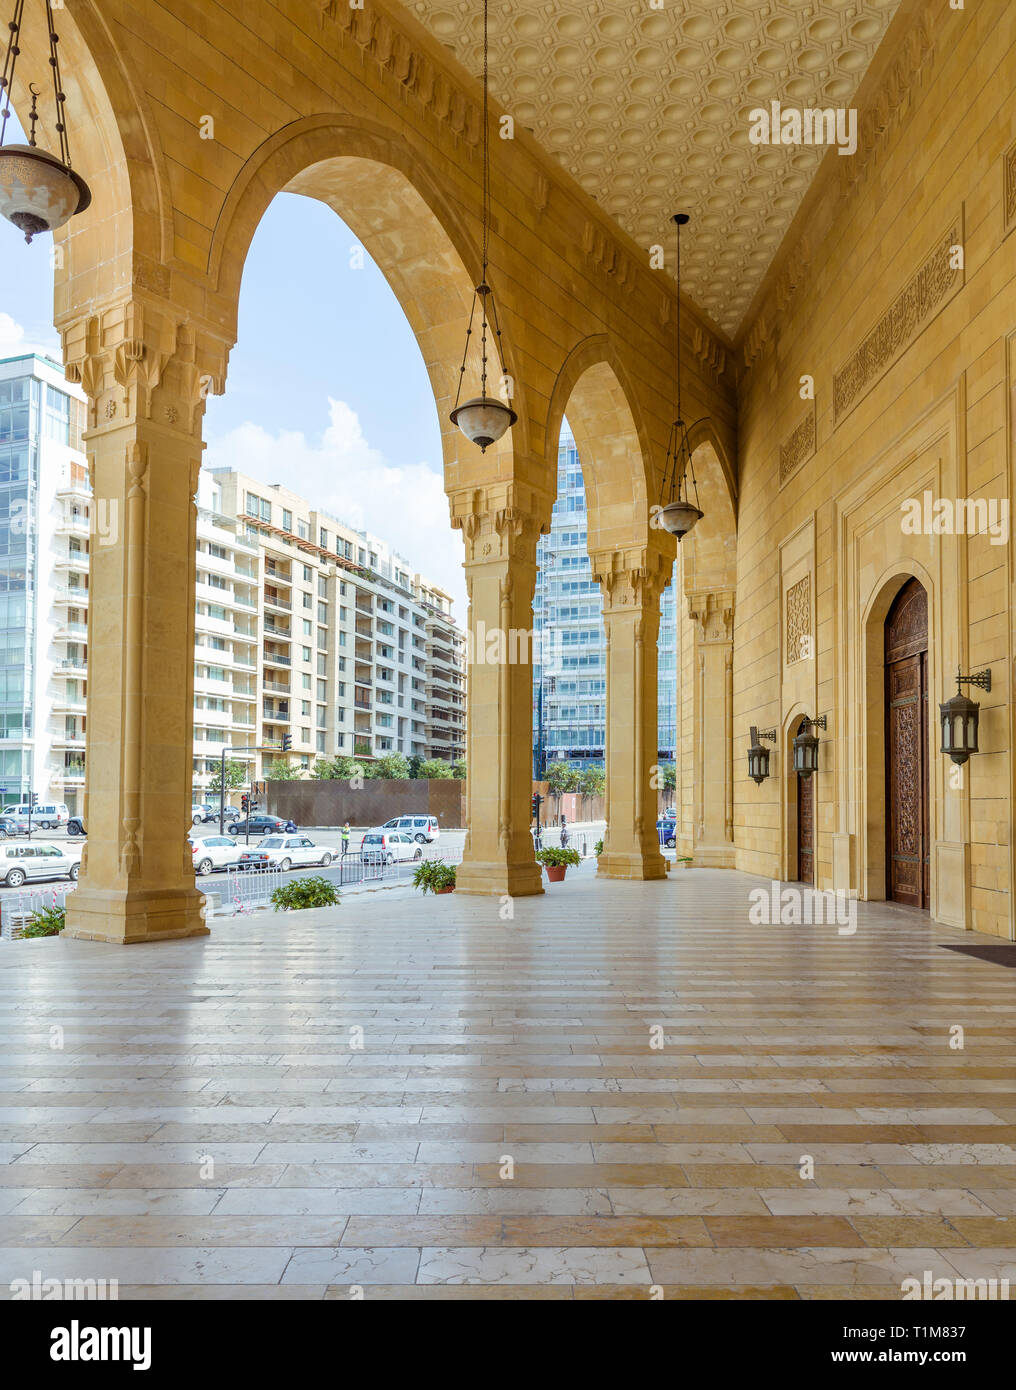 BEIRUT, LEBANON - 1 Apr 2017: The entrance hall of Al Amine mosque in Beirut, Lebanon. The mosque is a new monumental addition to the rebuilt city cen Stock Photo